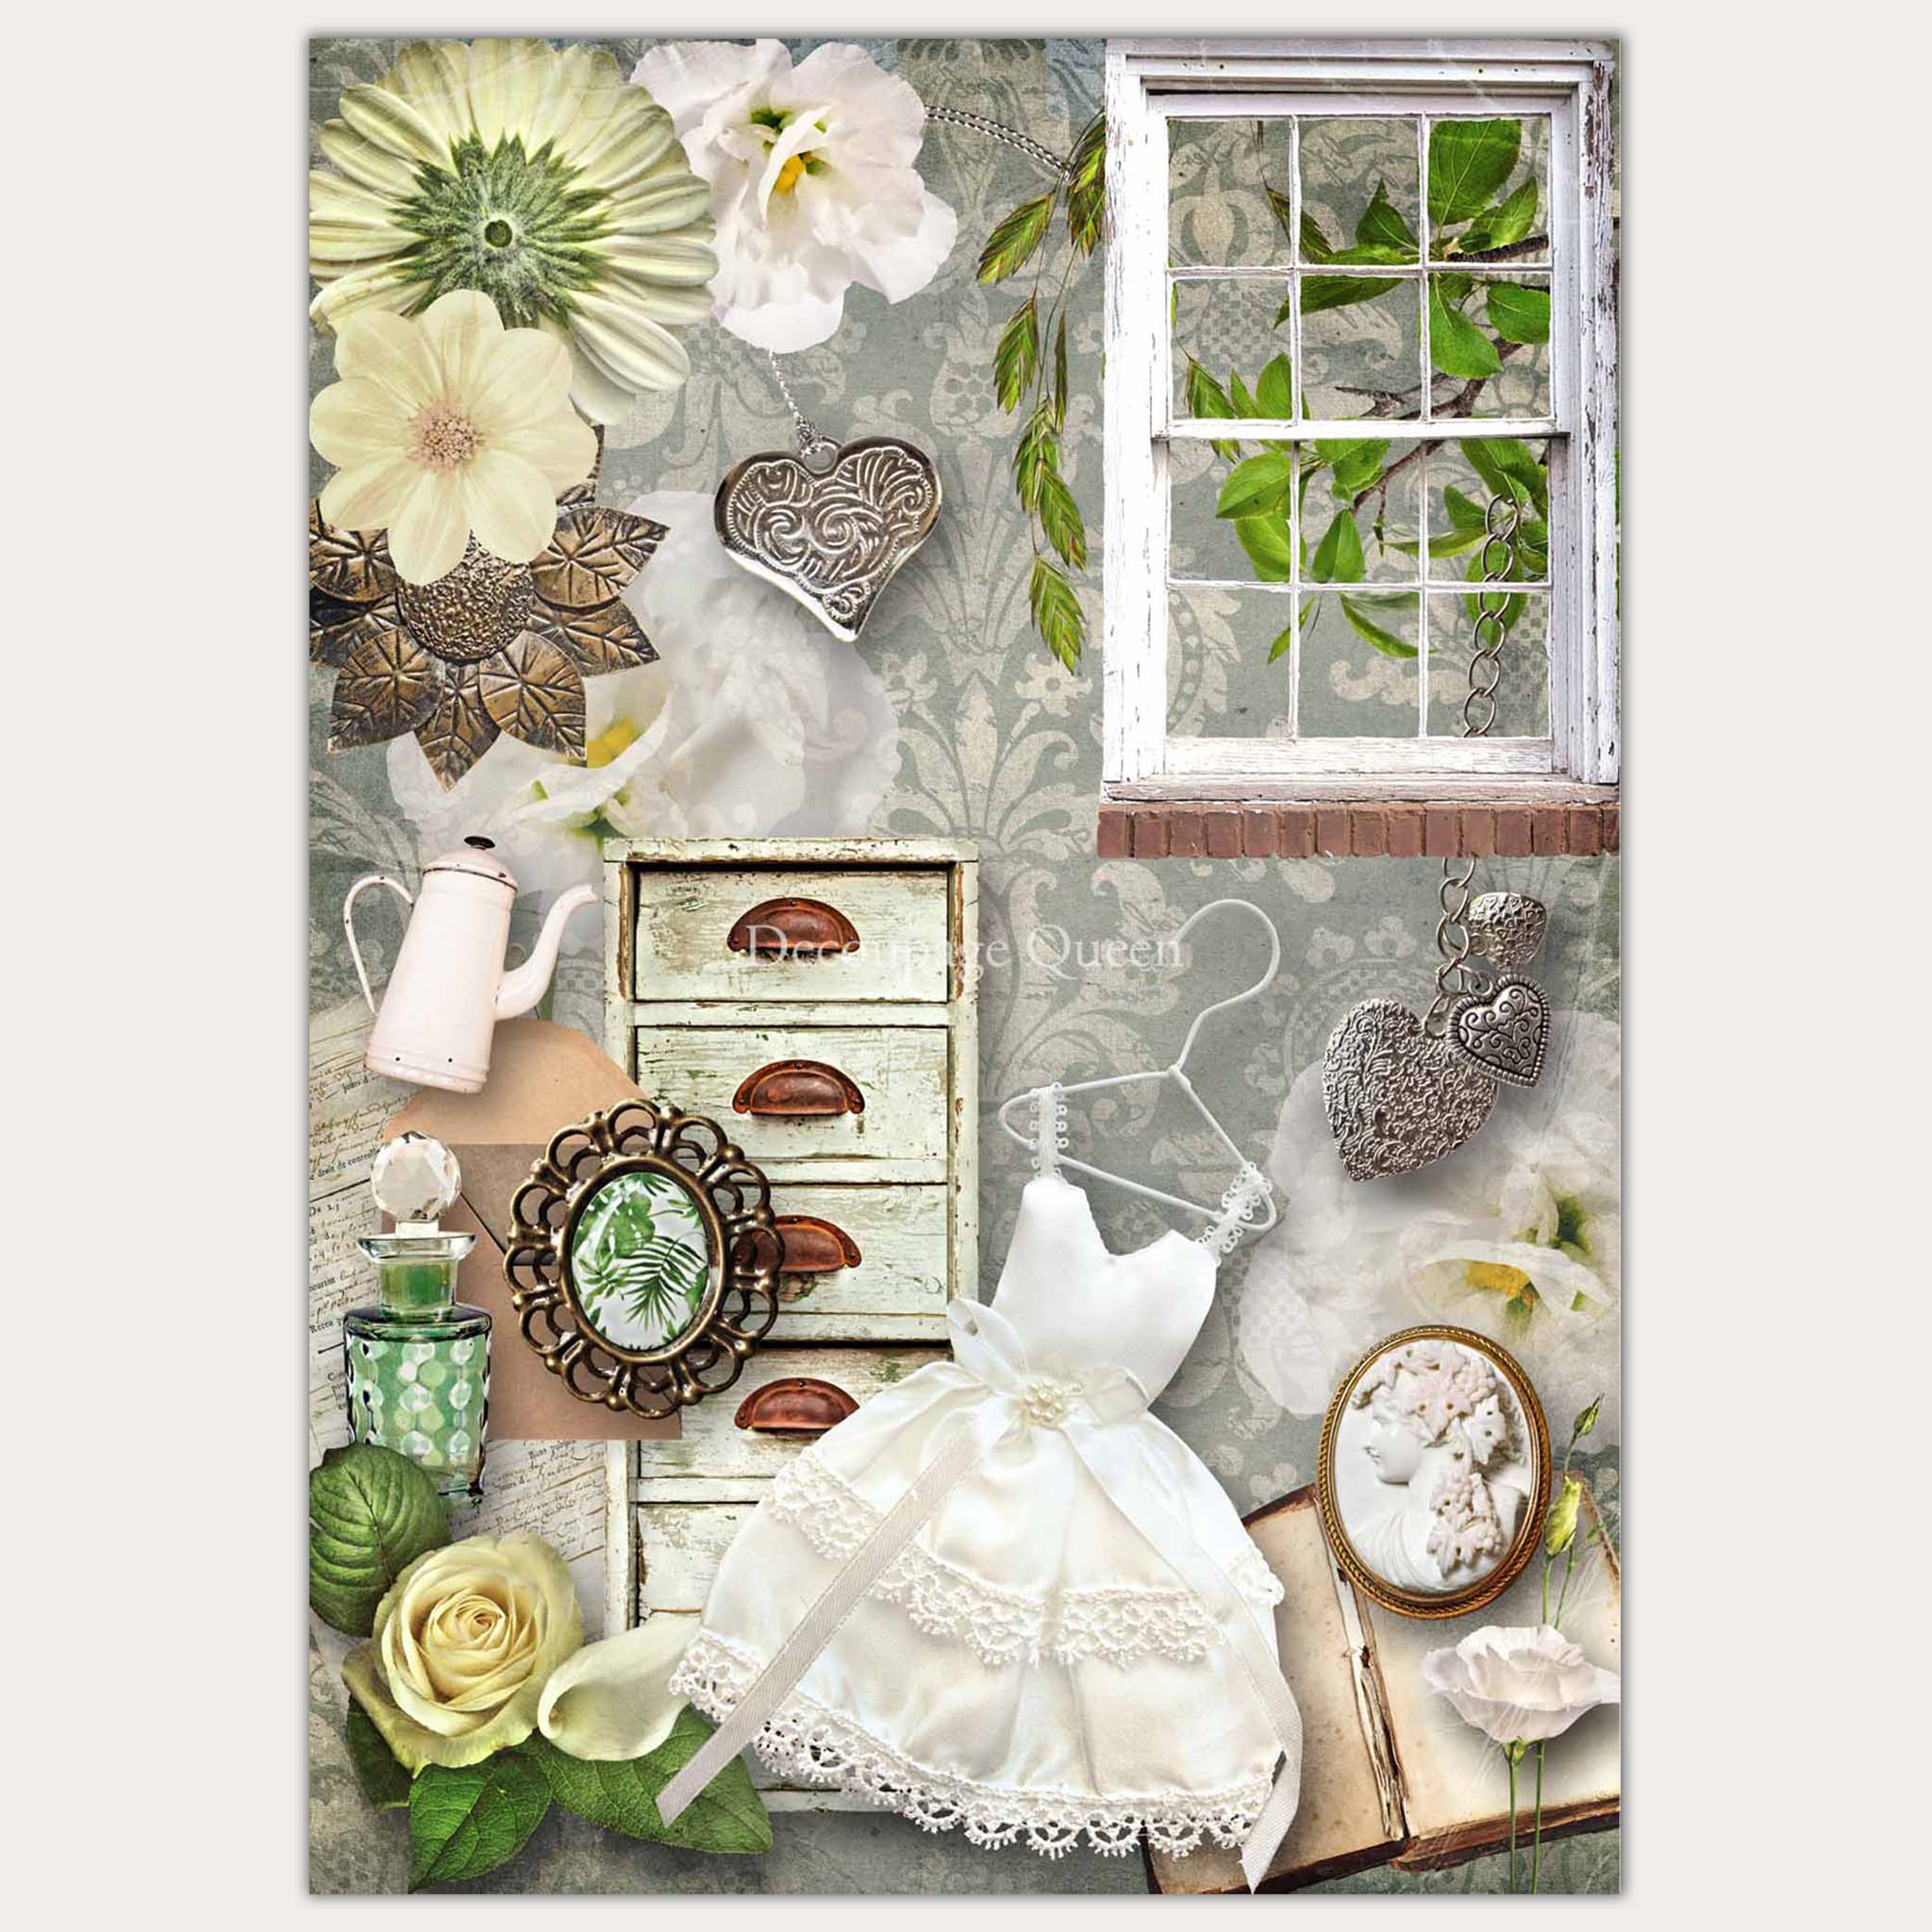 A3 rice paper design that features a collage of silver heart necklaces, a girls white dress on a hanger, a perfume bottle, a distressed vintage chest dresser, a white 12 pane vintage window, and white flowers against a damask wallpaper. White borders are on the sides.